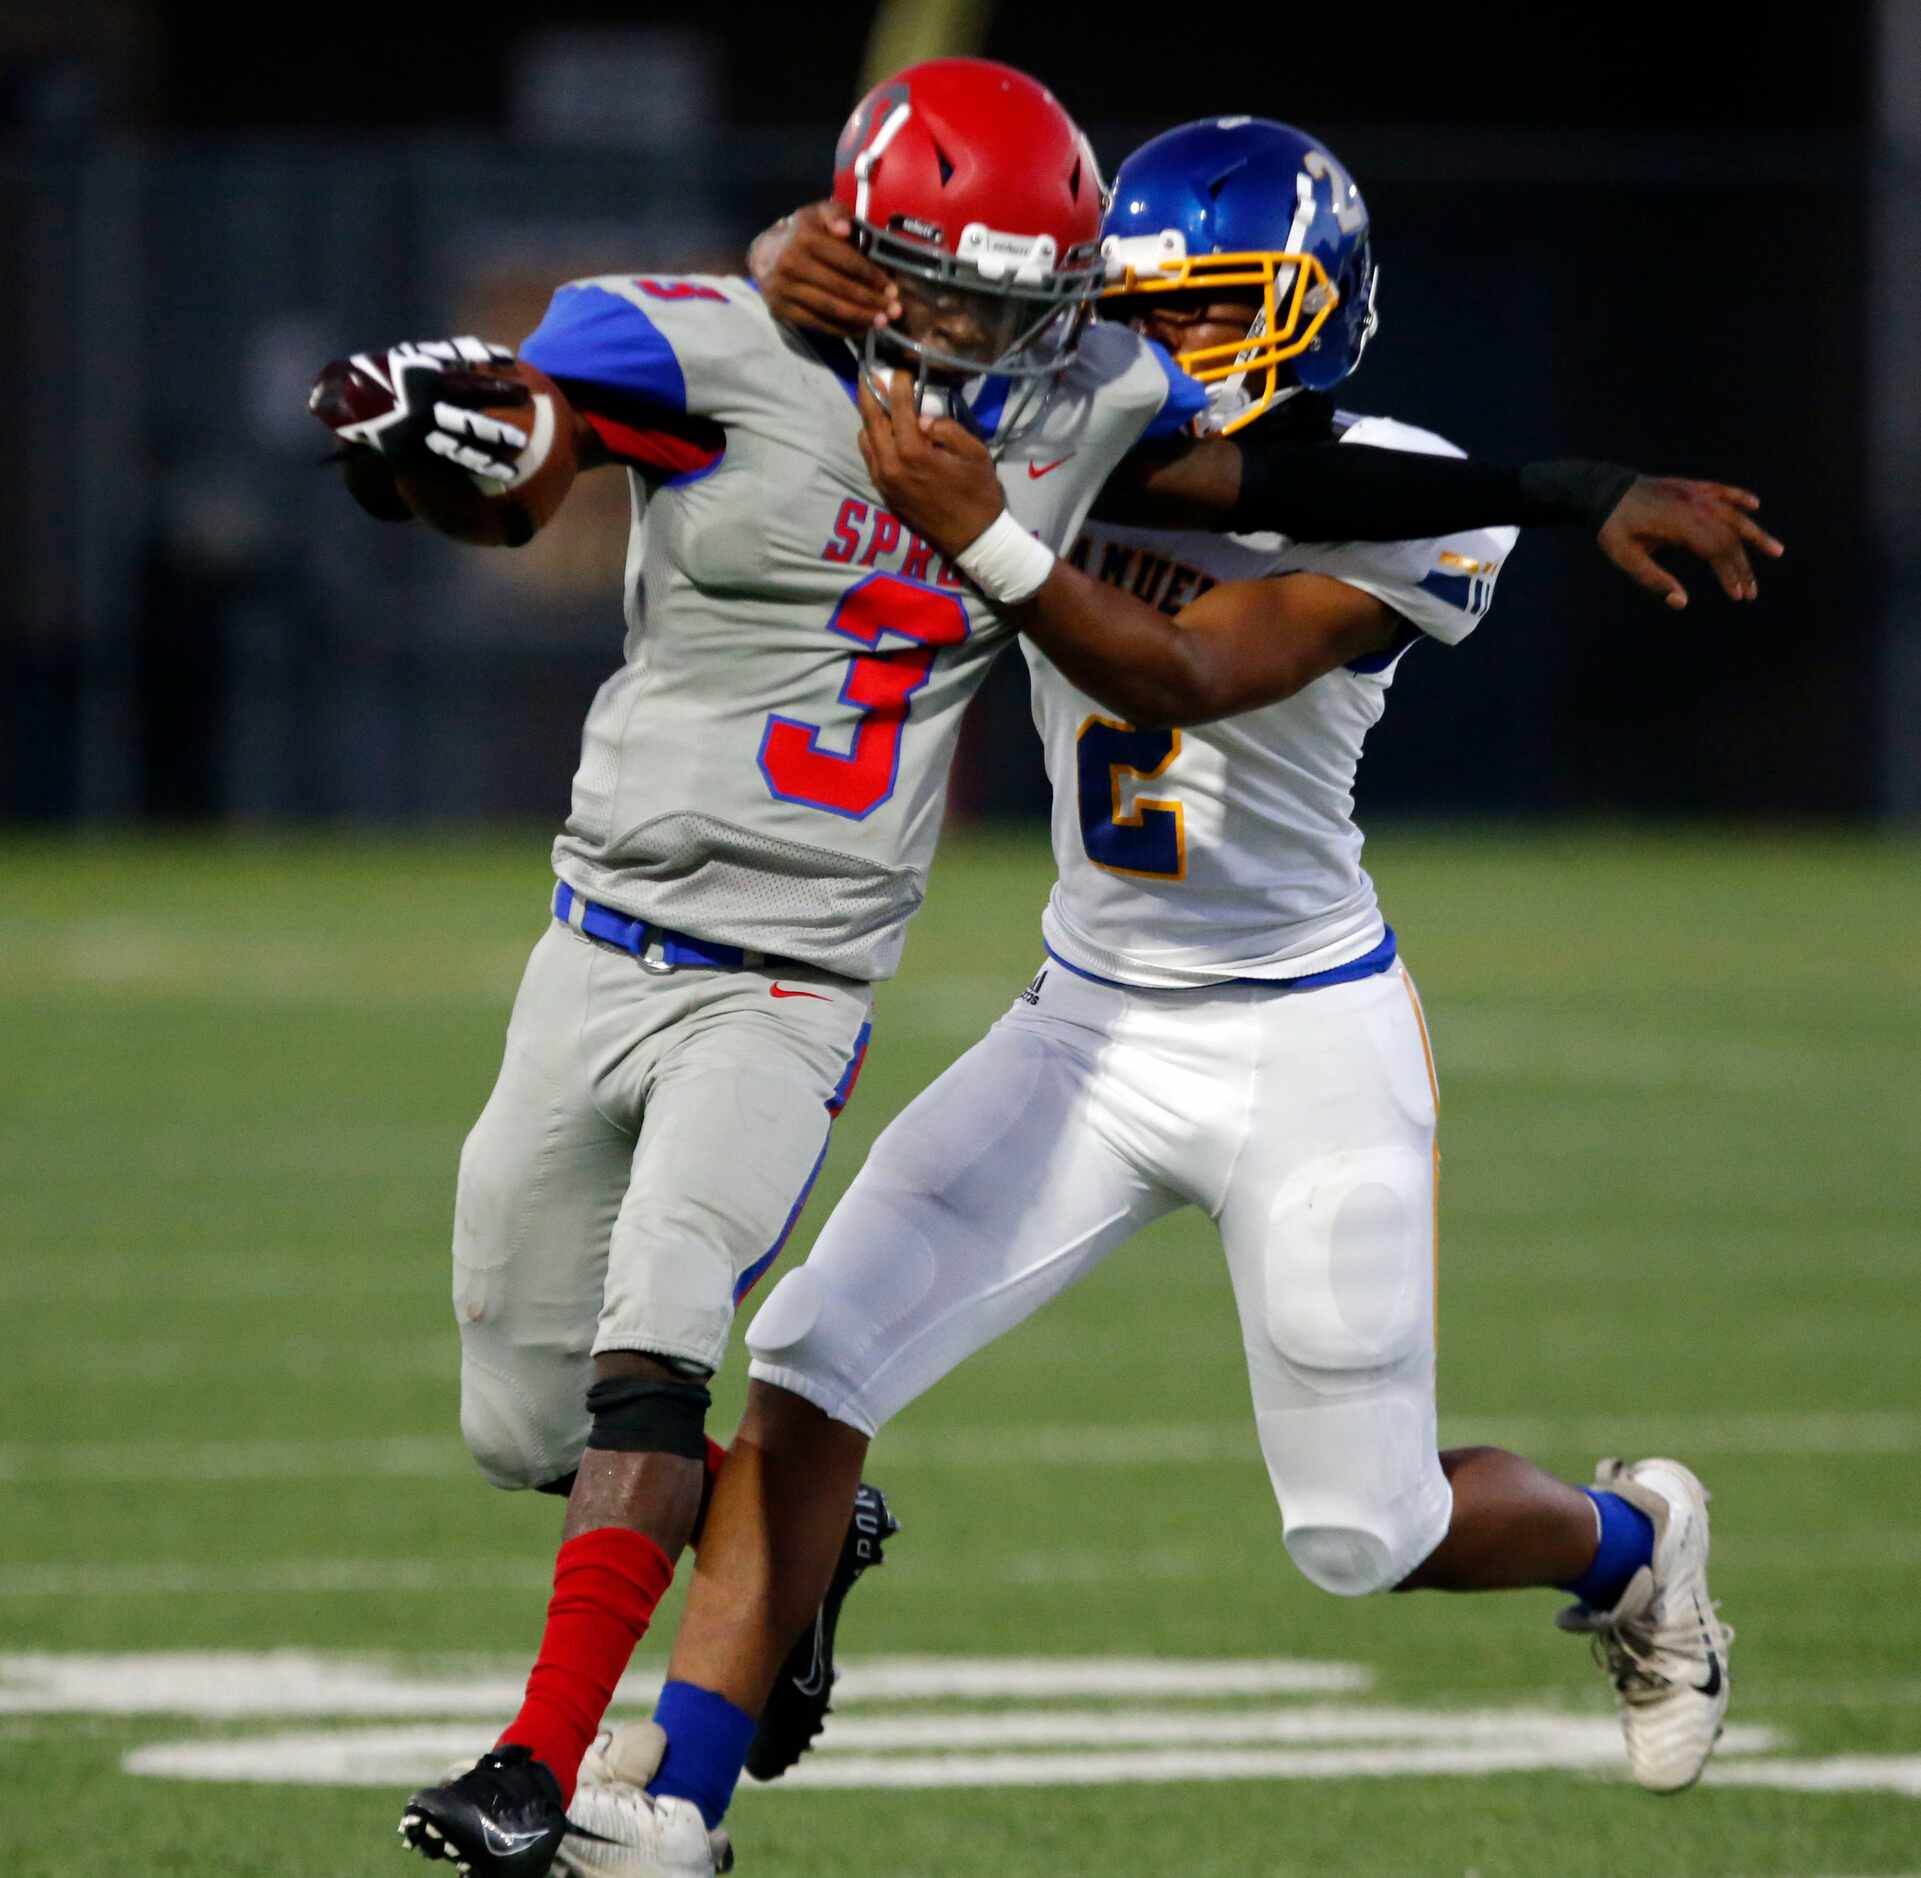 Spruce High QB Timad Cotton (3) is face masked by Samuell high defender Xzavion Beard (2)...